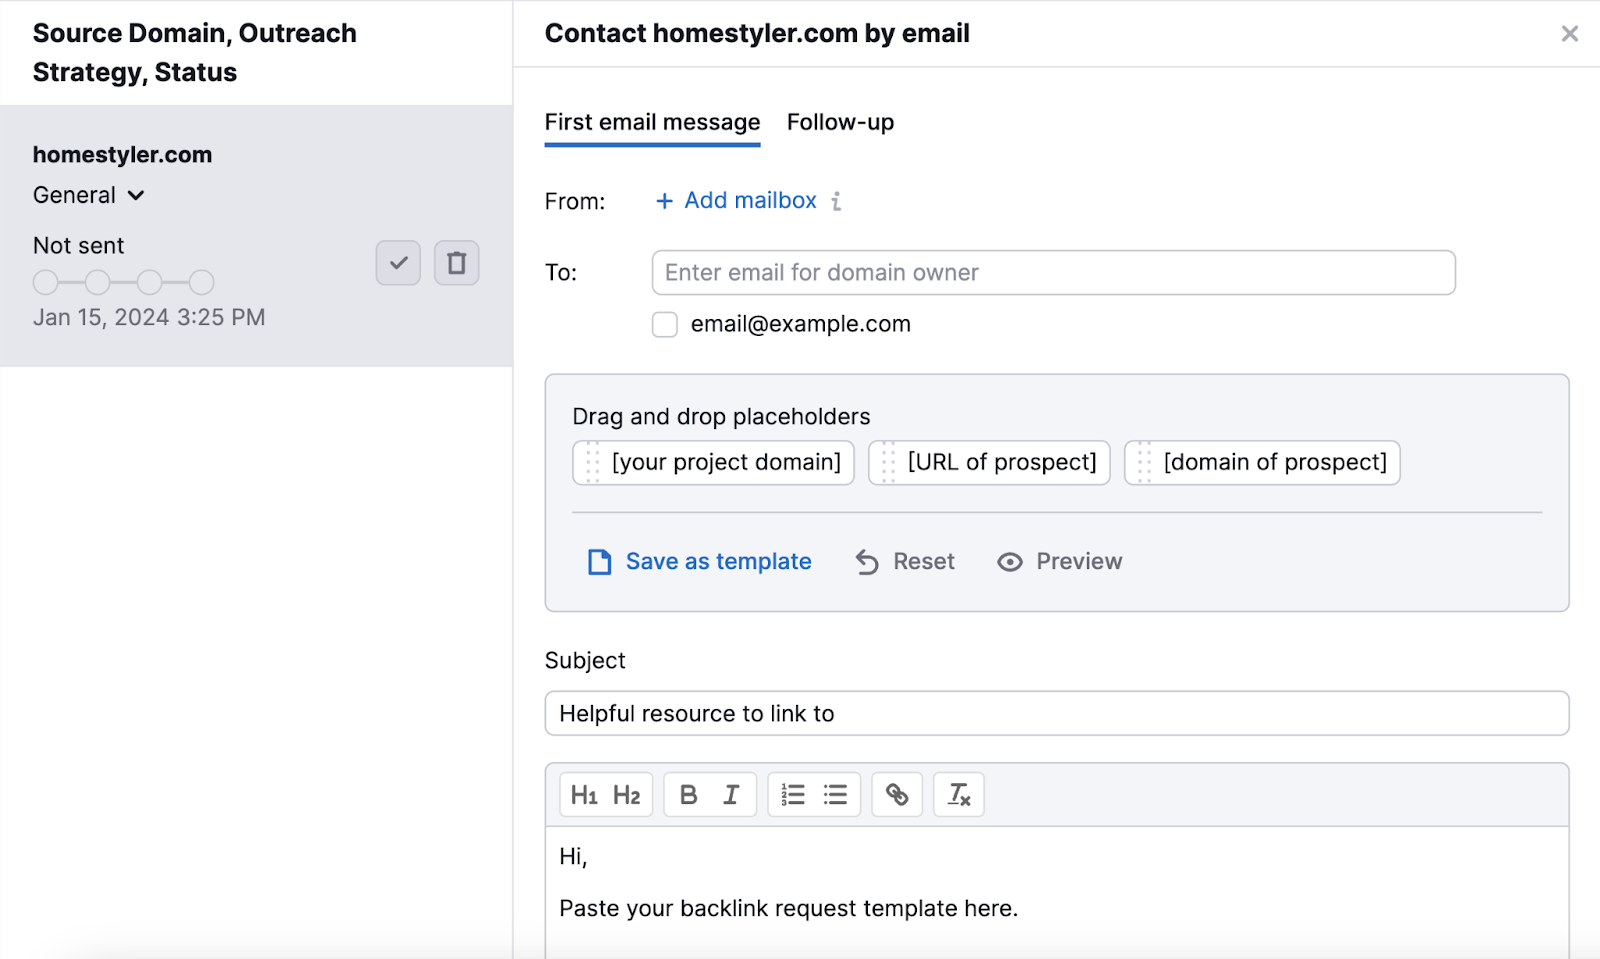 Start email outreach directly from the Link Building Tool